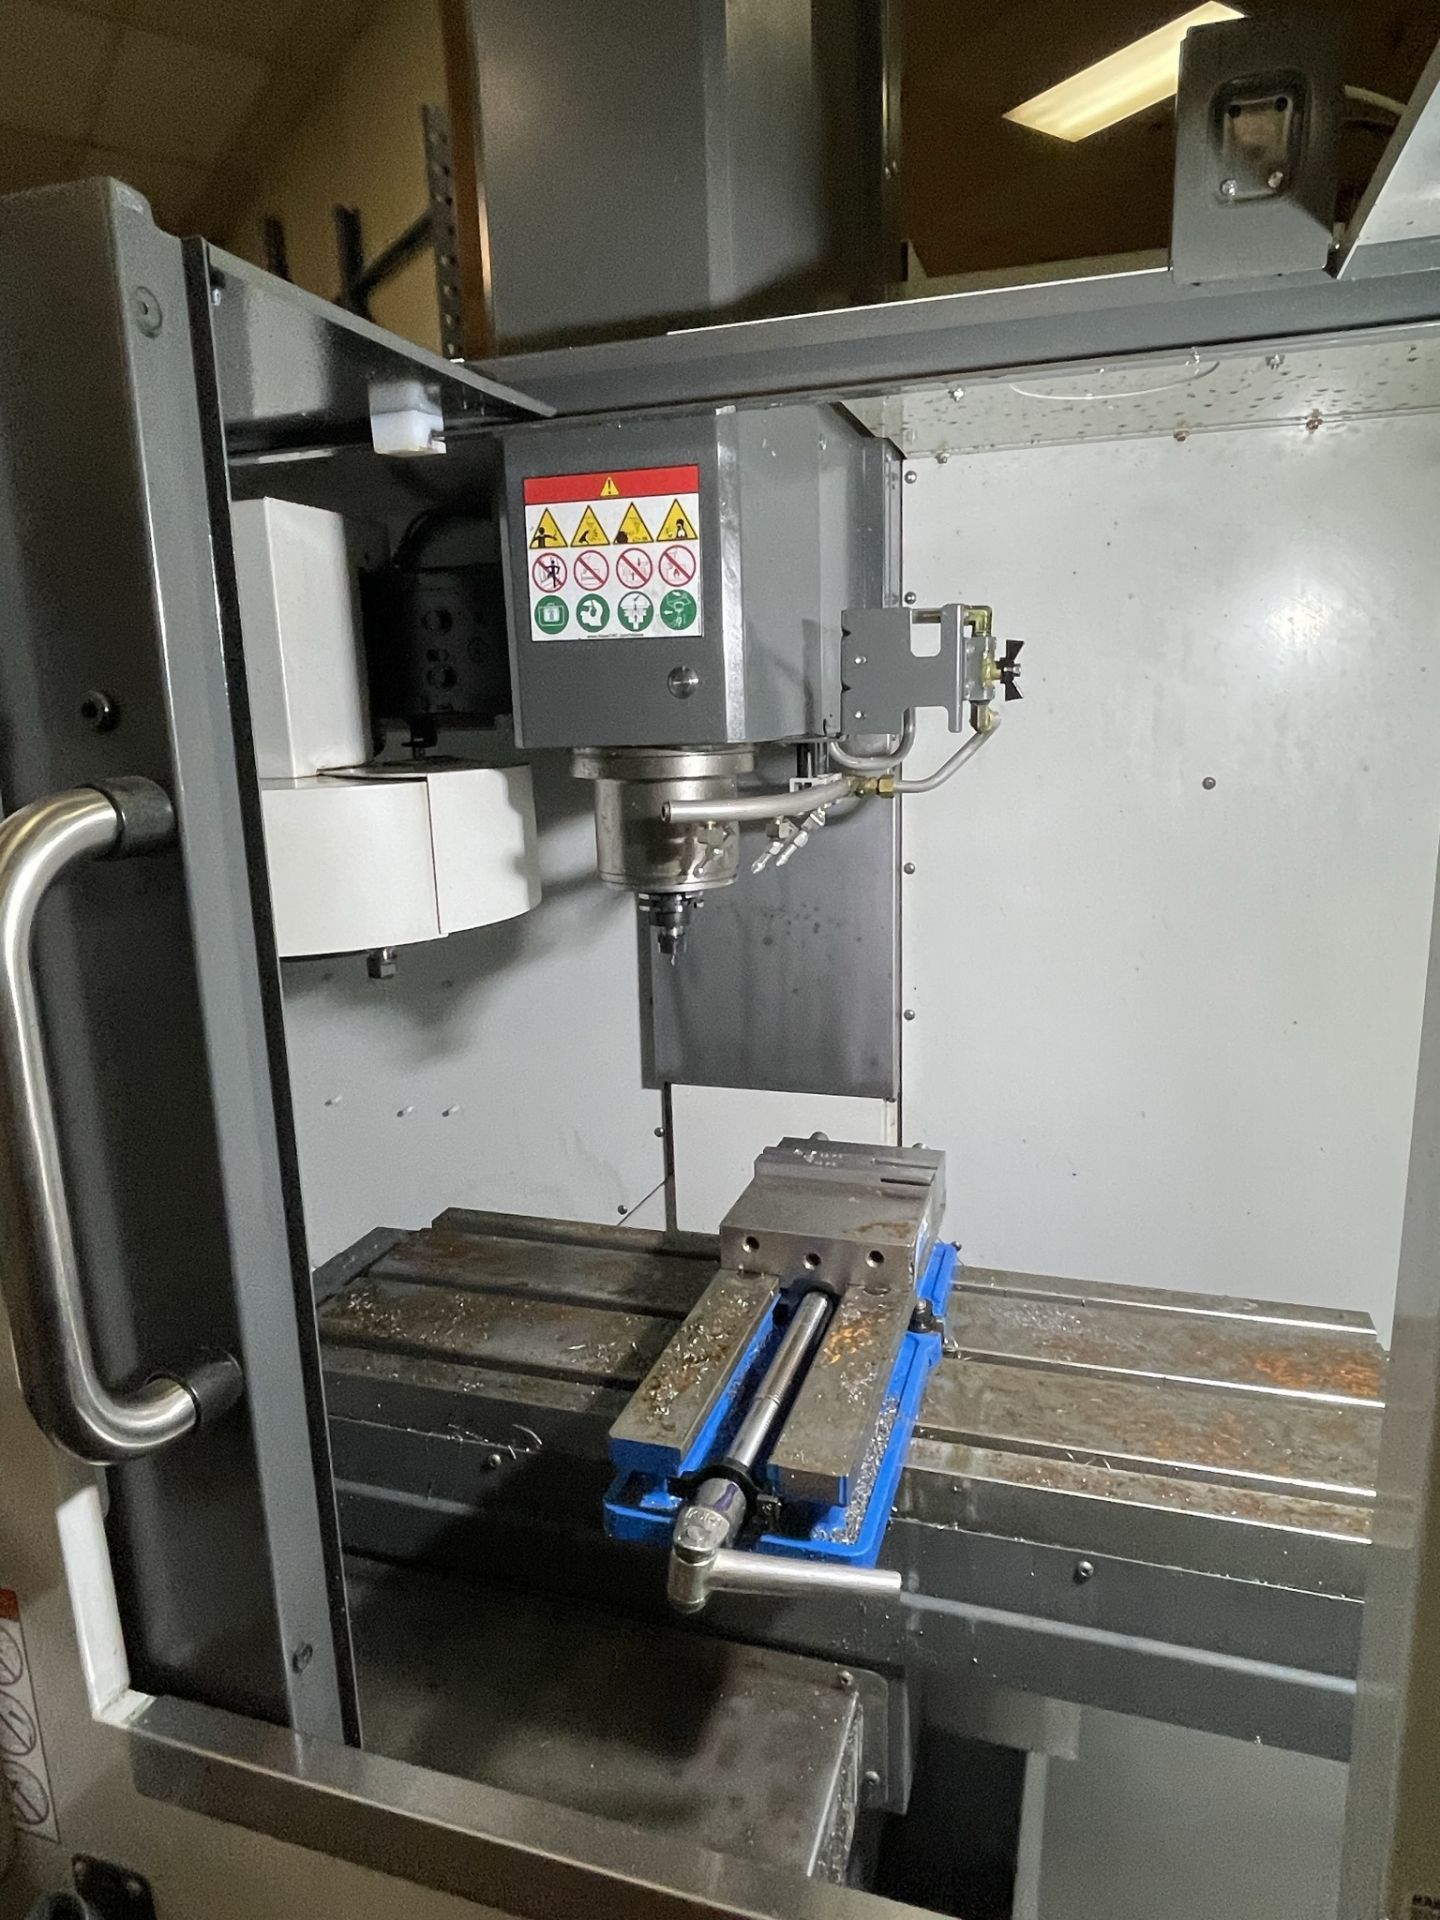 HAAS Mini Mill CNC Vertical Machining Center, Late Model, Low Hours, New 2019 *Off-Site* - Image 5 of 7